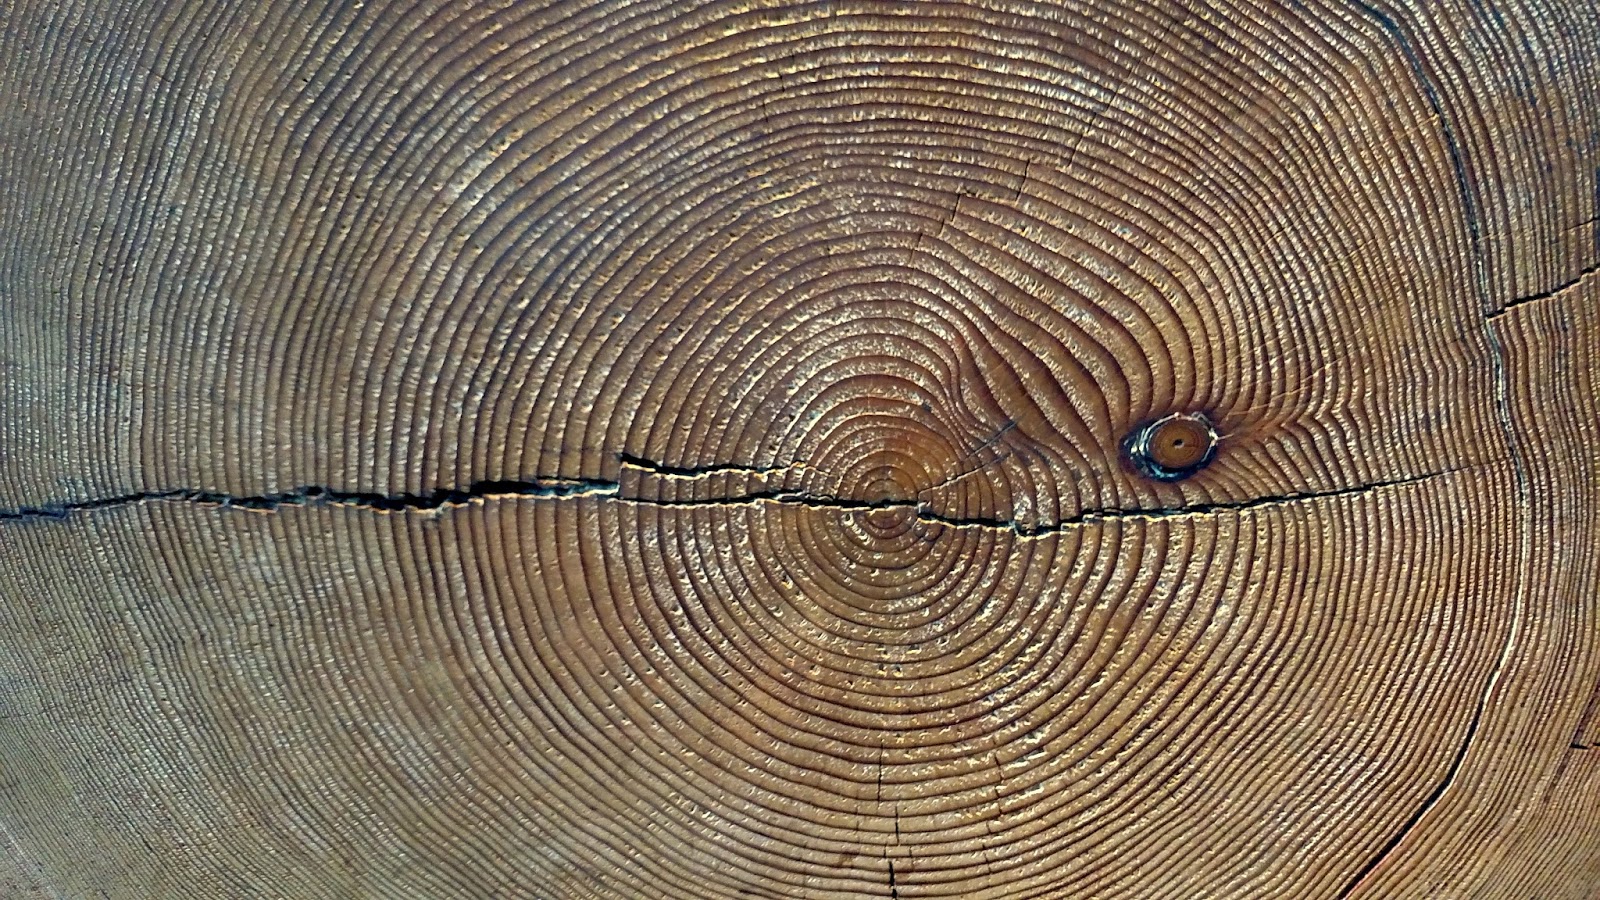 The Mathematical Tourist: Tree Rings and Old Wood